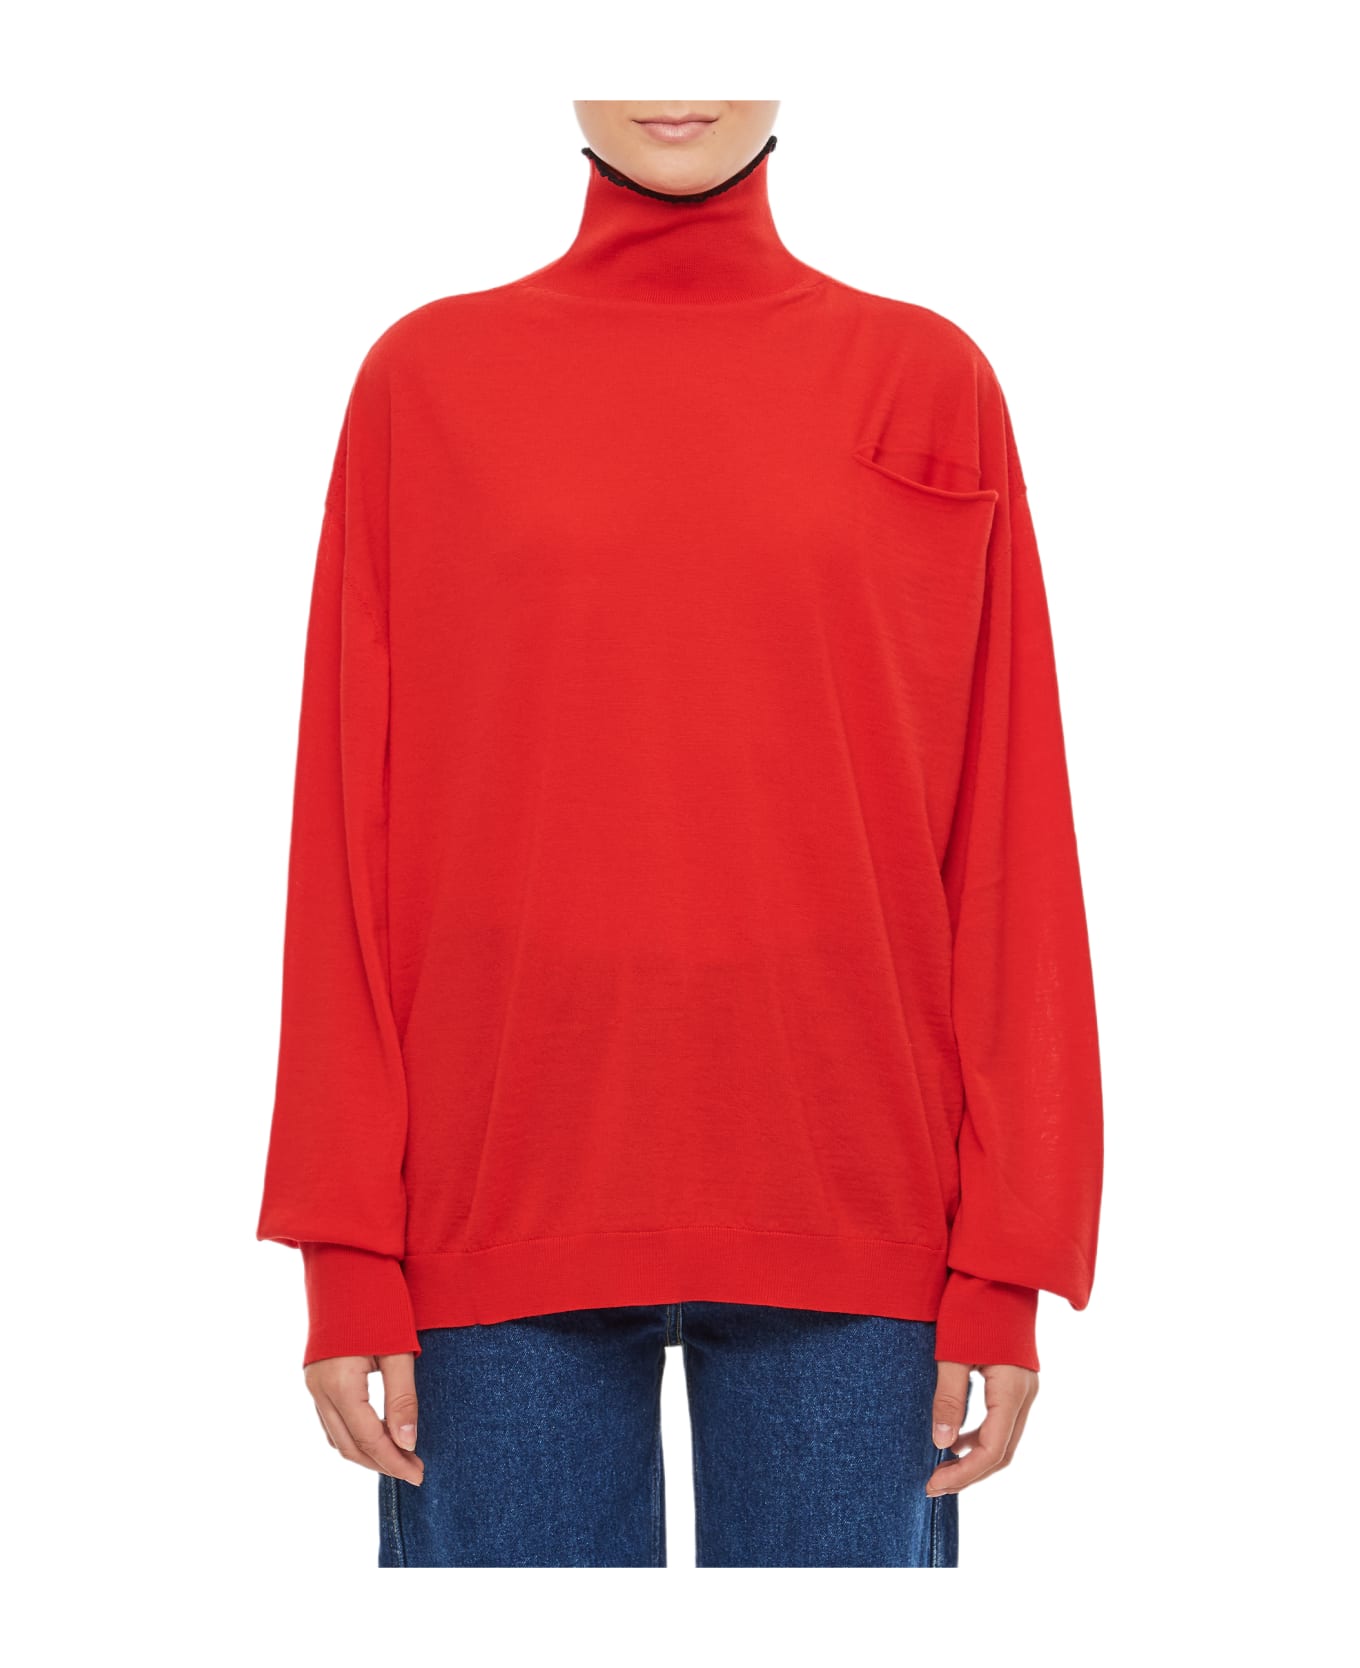 Quira Rollneck Wool Sweater - Red ニットウェア